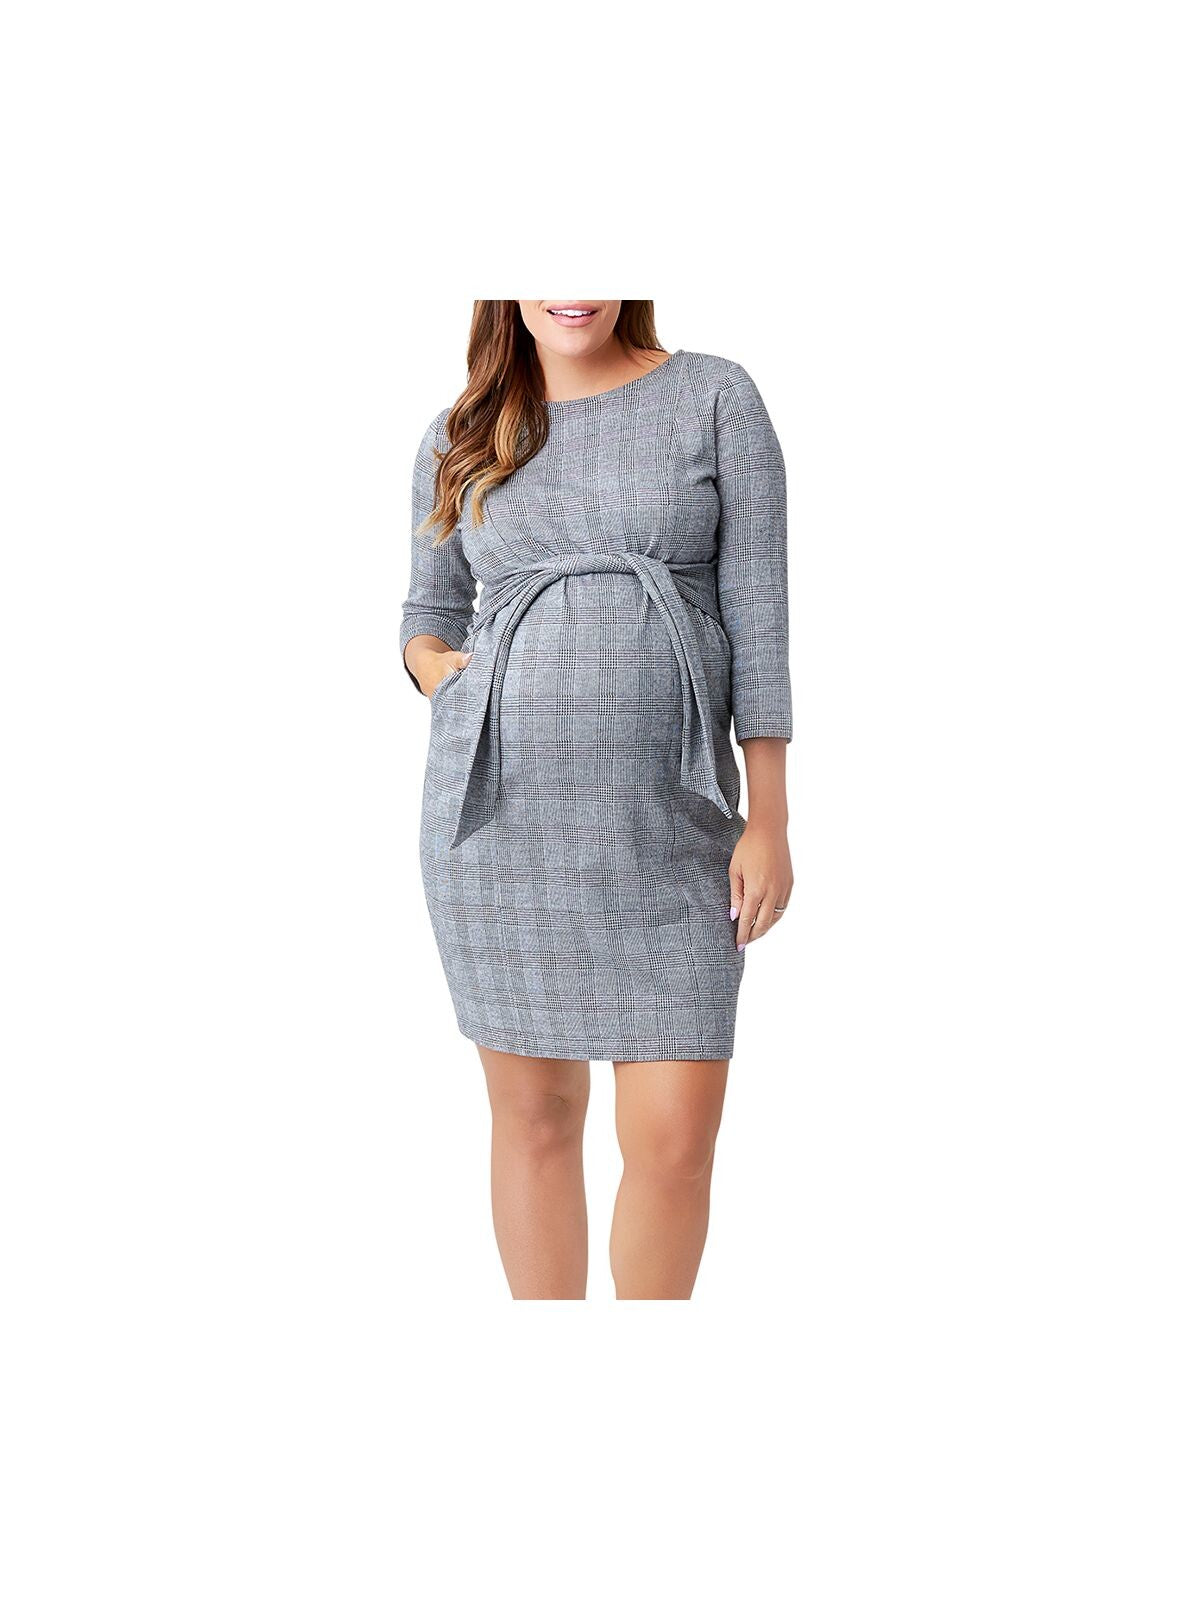 NOM Womens Gray Houndstooth Long Sleeve Above The Knee Sheath Dress Size: S